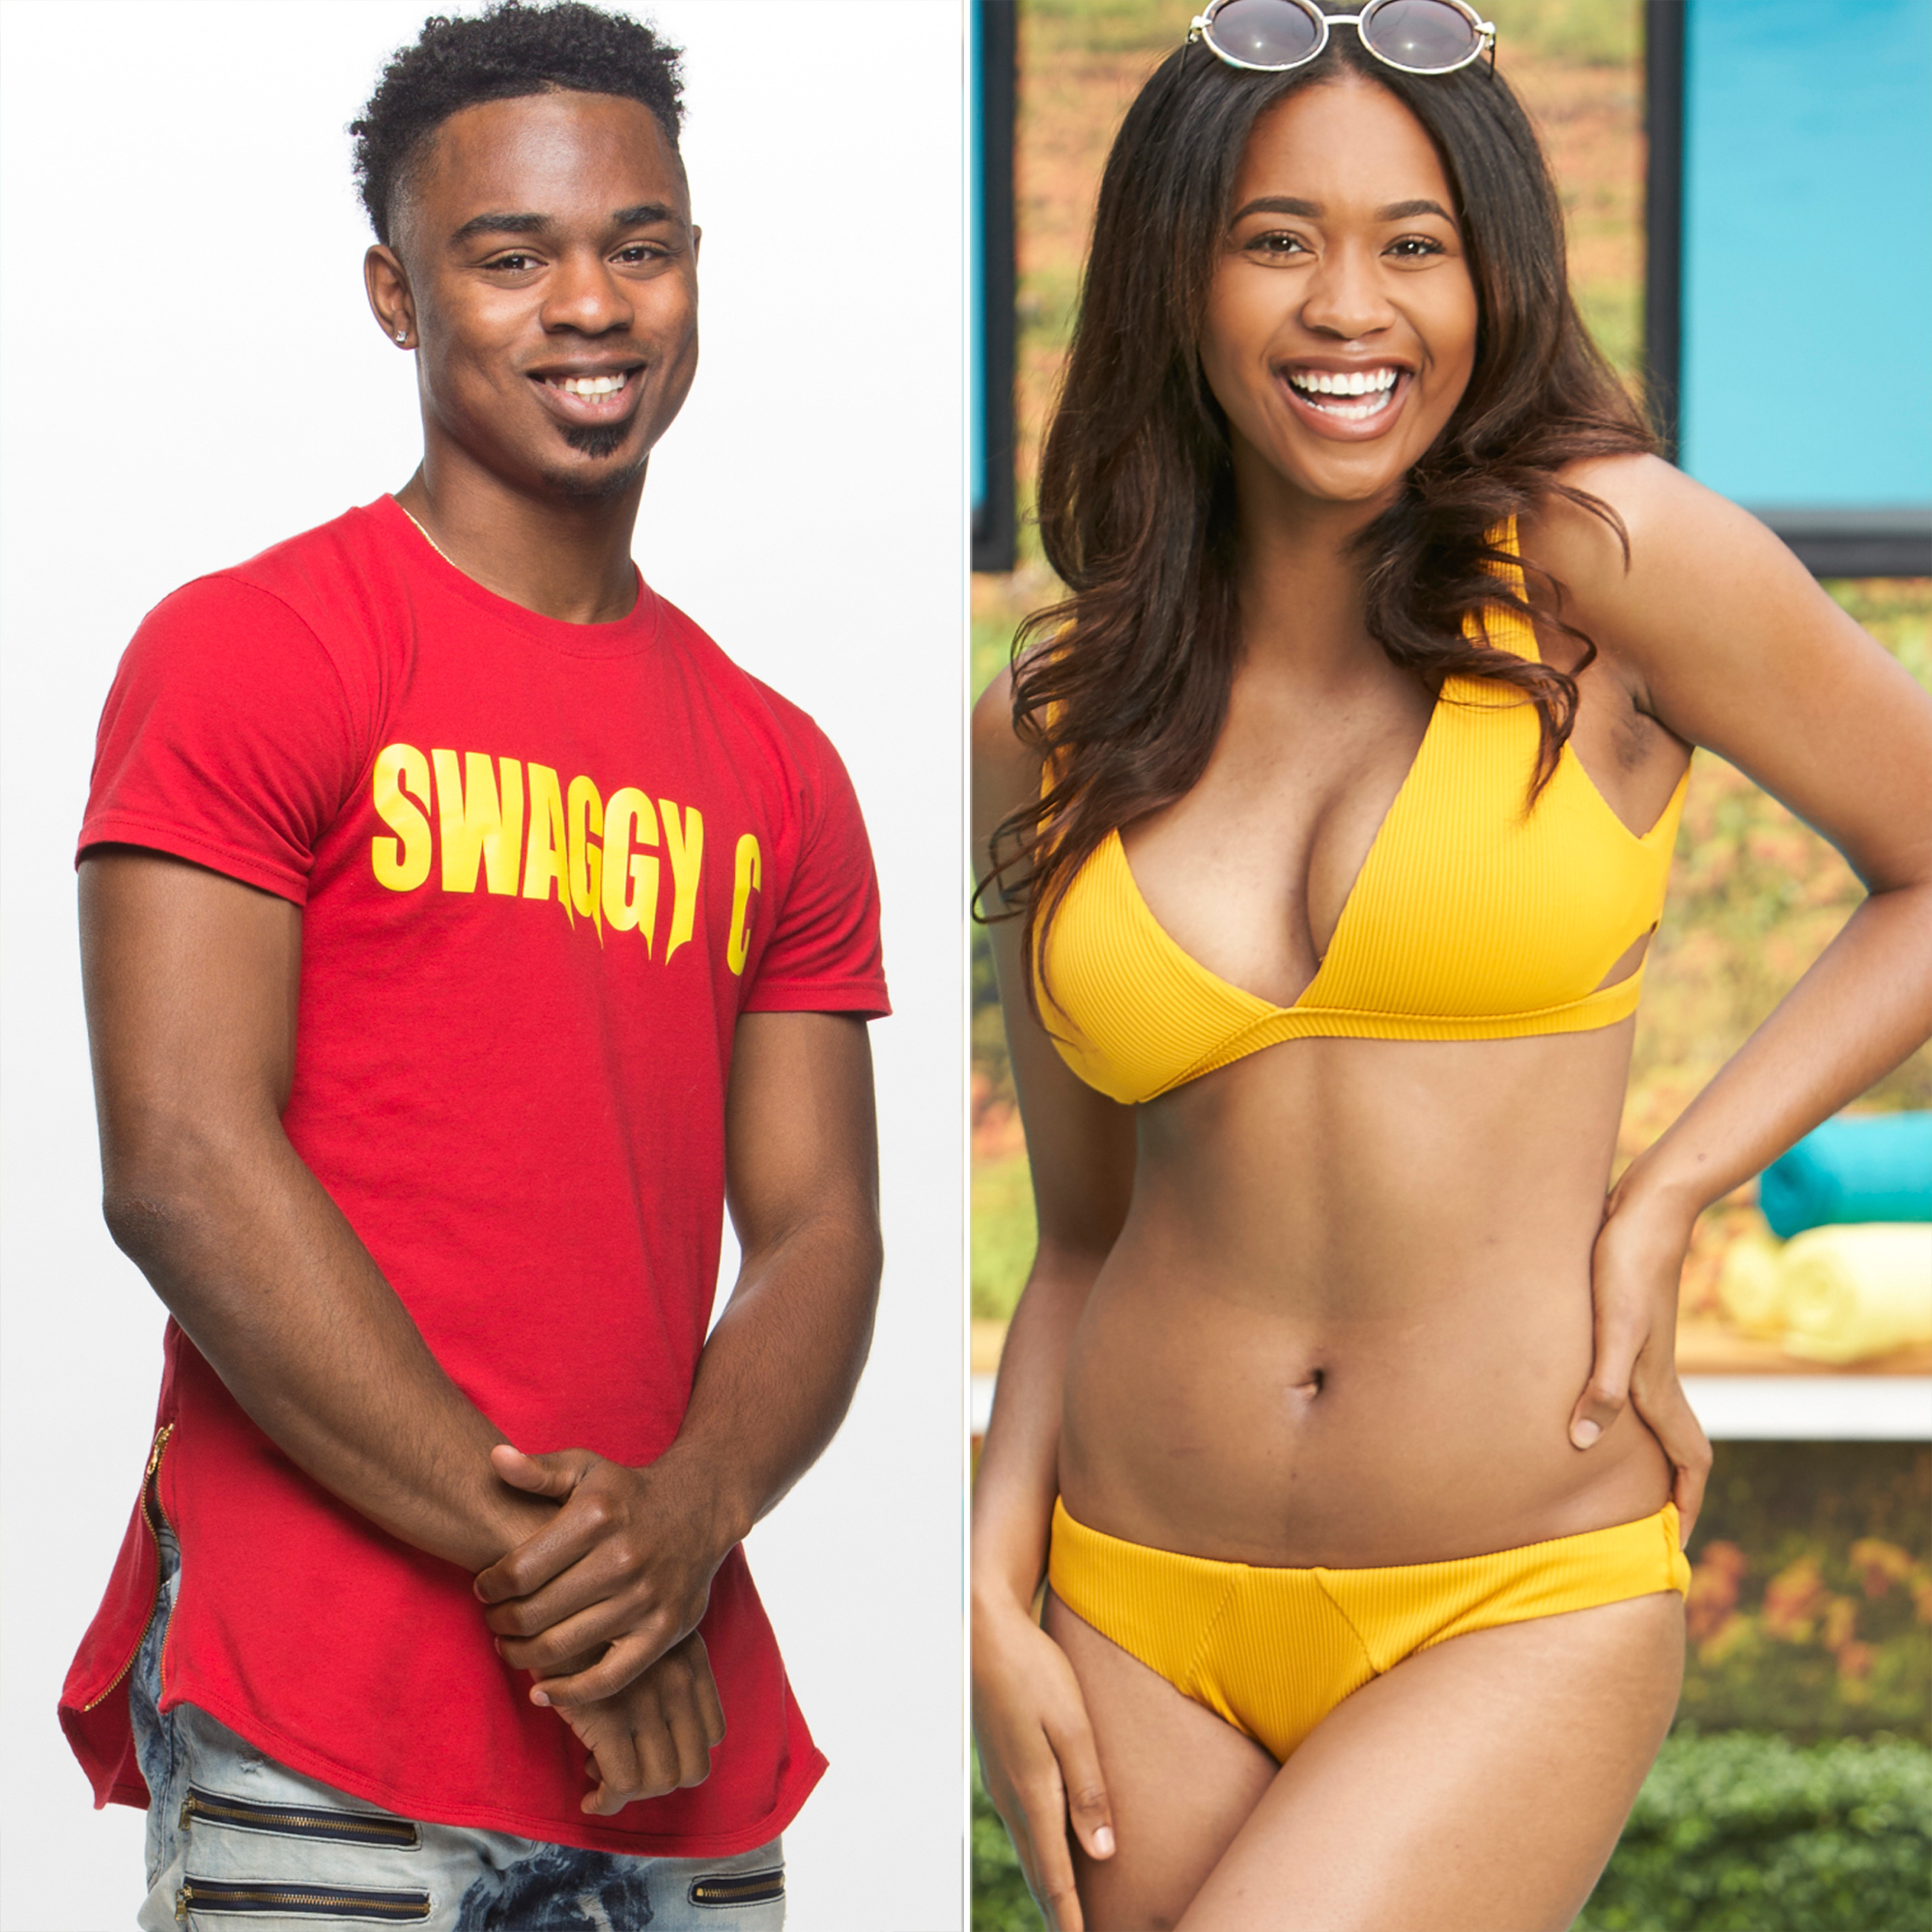 Big Brother's Bayleigh Dayton Gives Birth to Baby No. 2 With Husband Swaggy  C